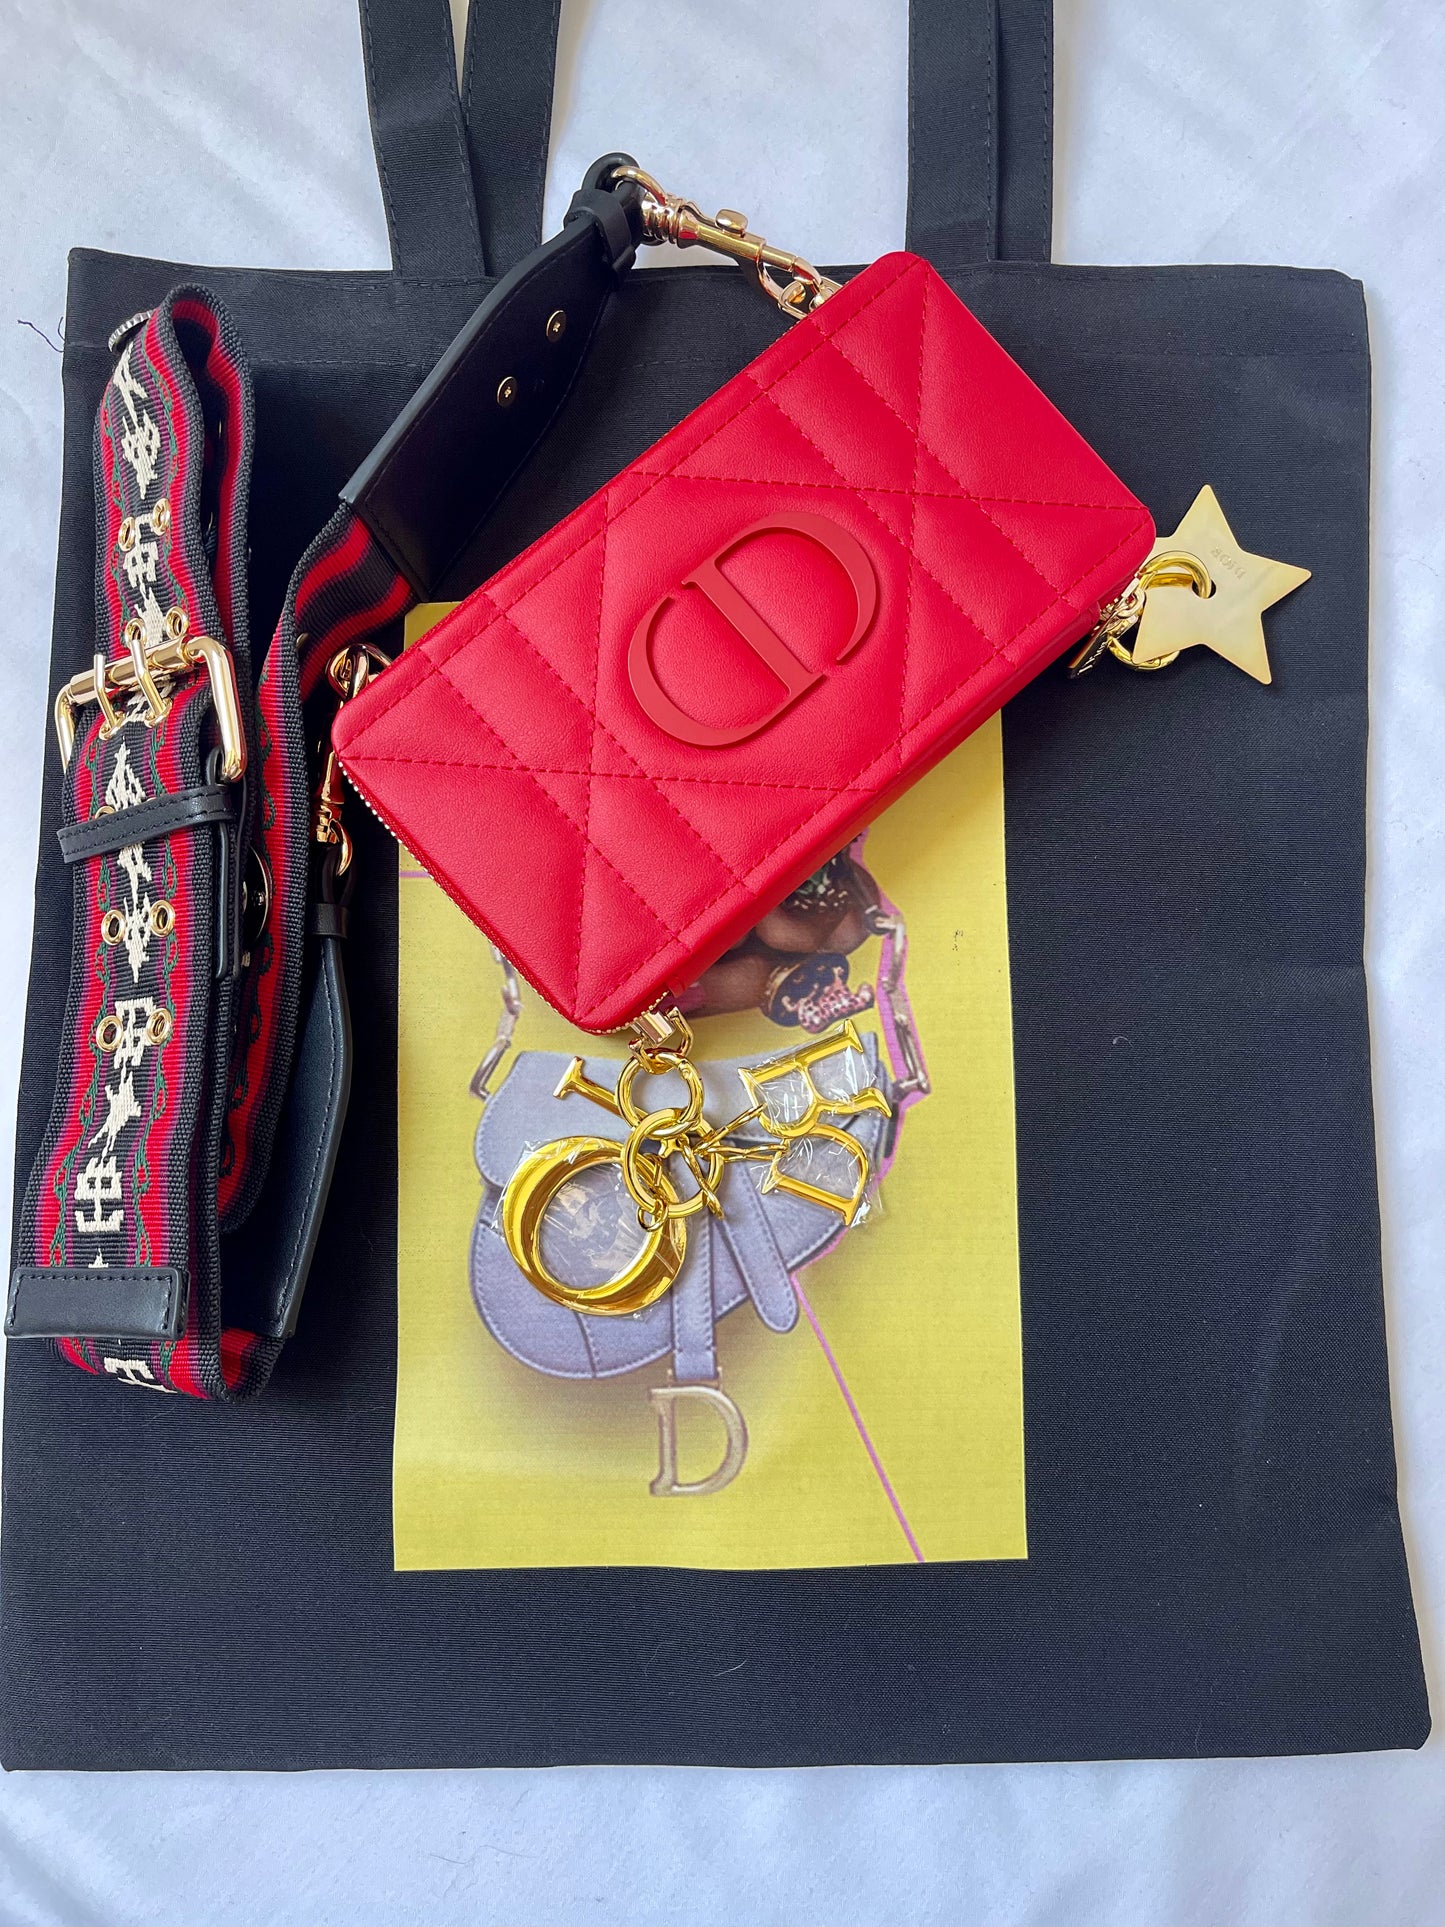 Up cycled red Dior clutch